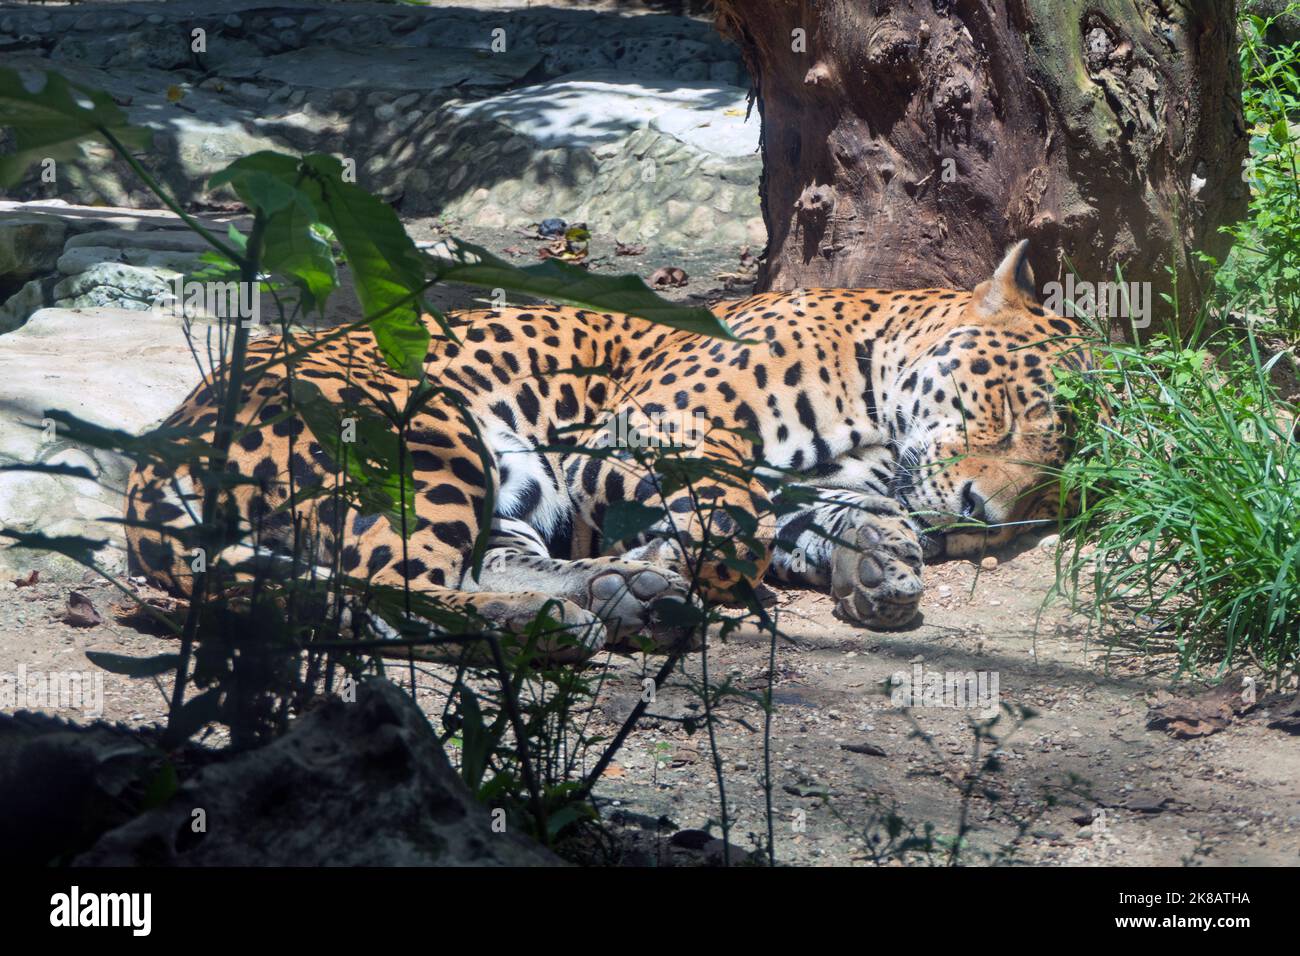 Large male jaguar in zoo cage in Chiapas, Mexico. Big cat (Panthera onca) resting in enclosure Stock Photo